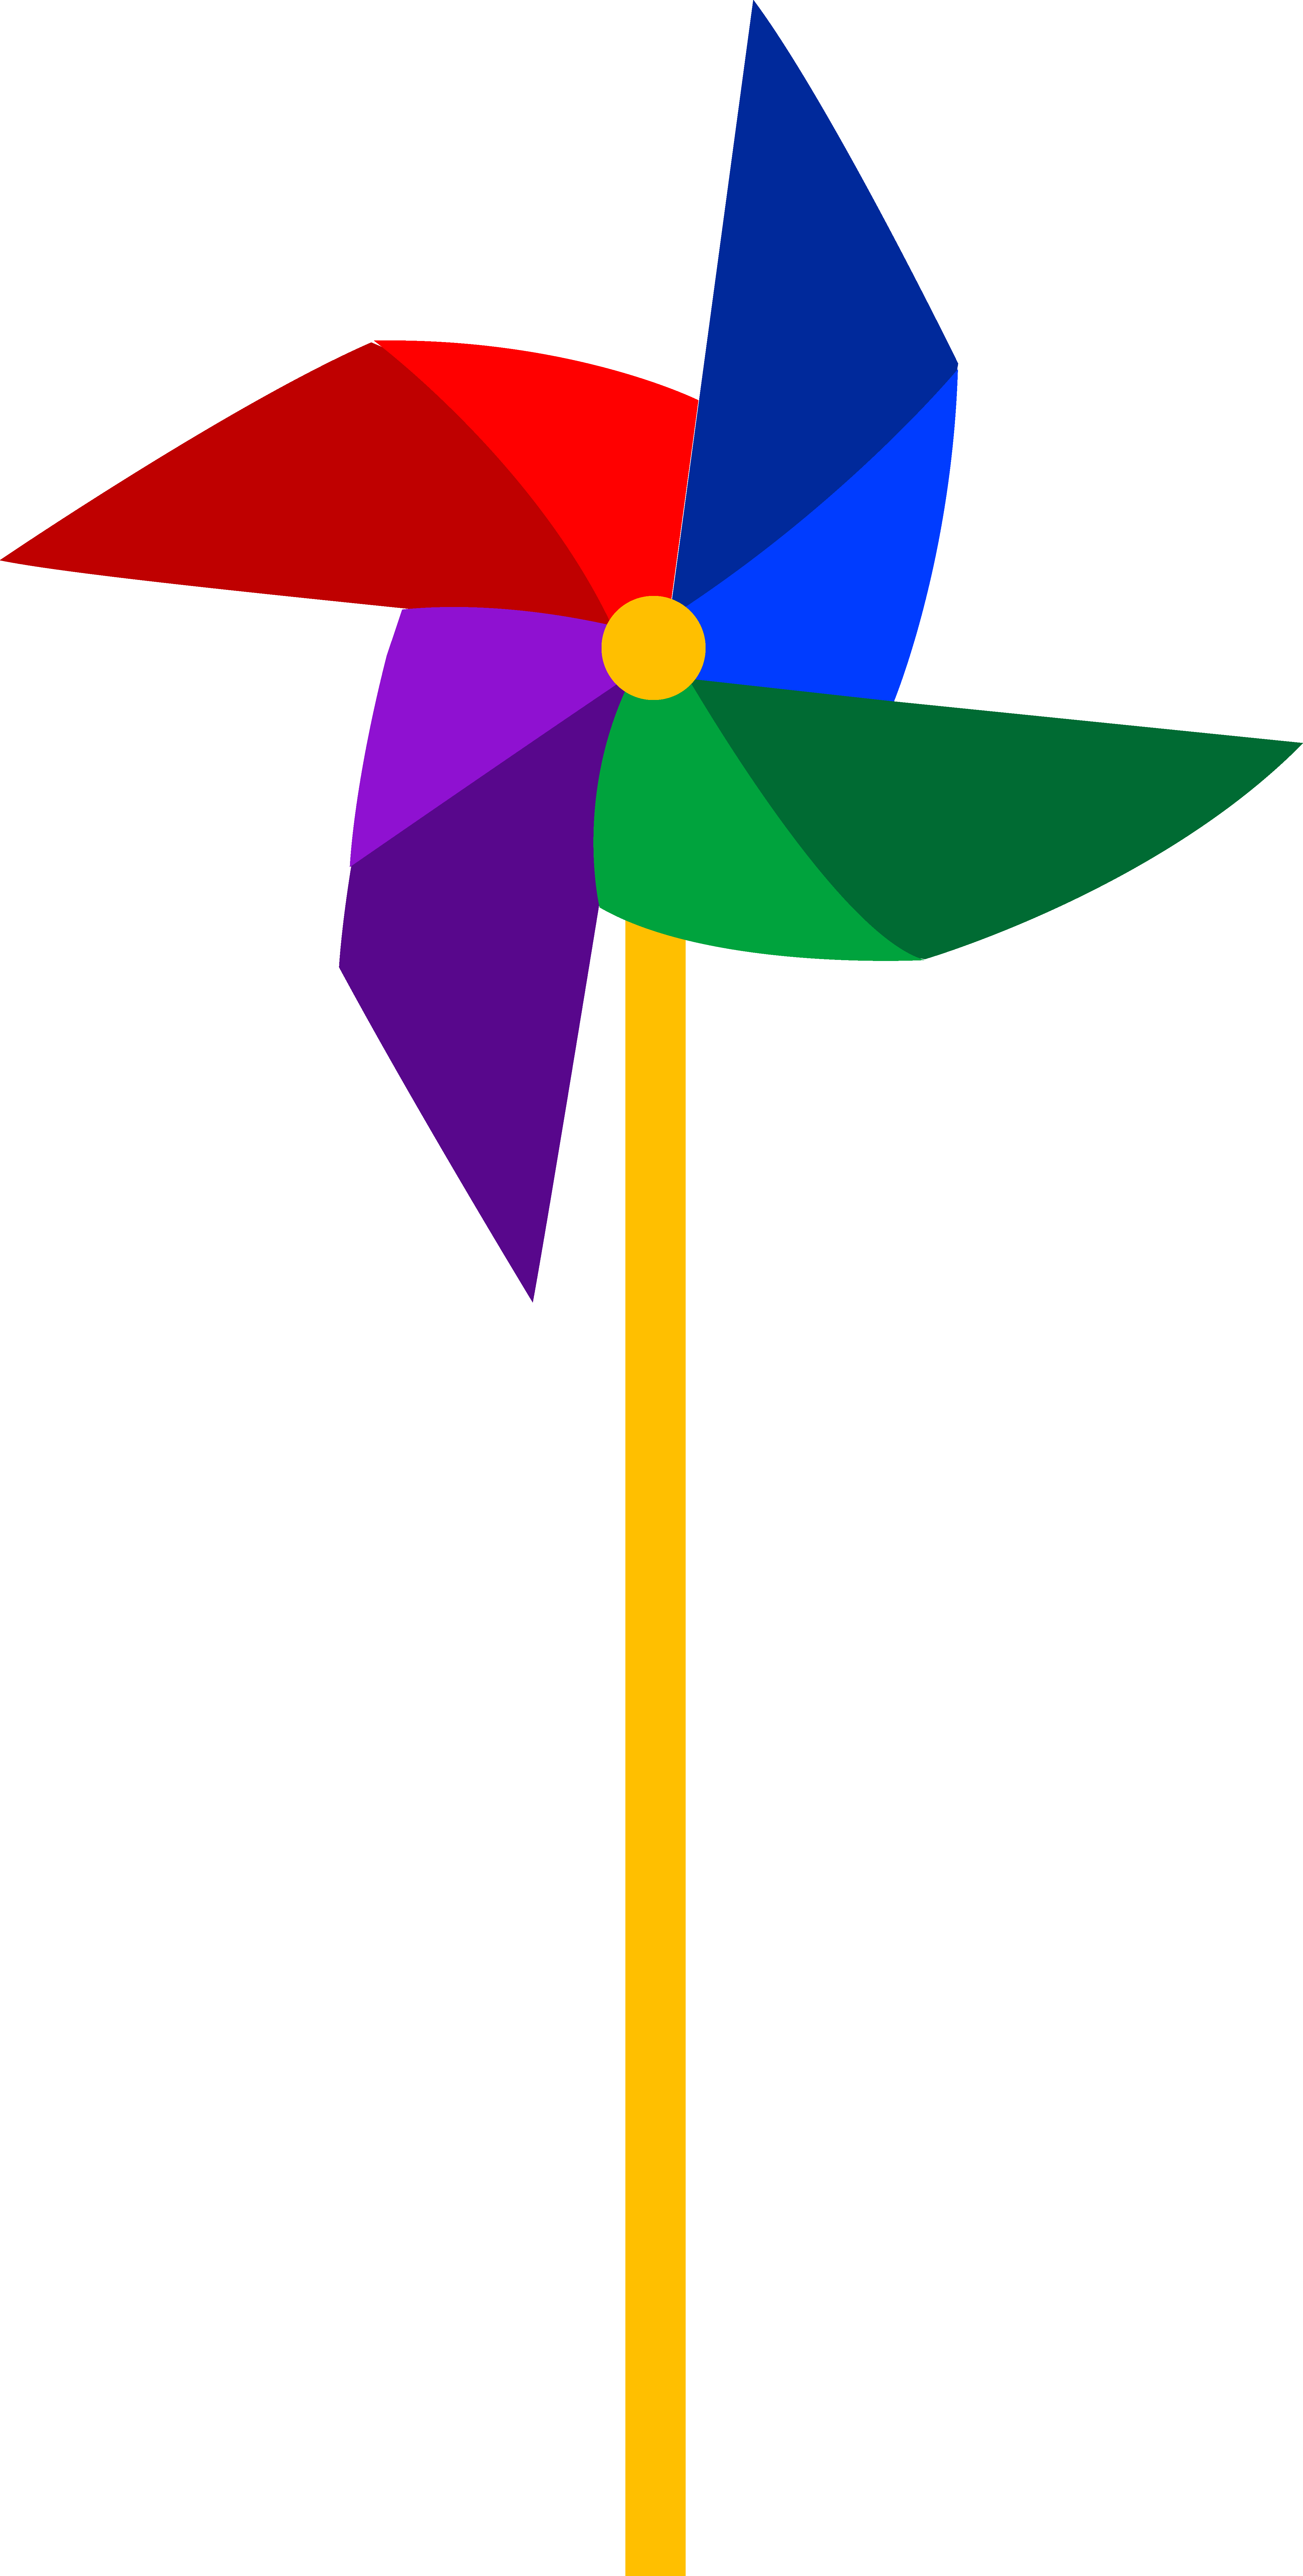 Clip art of a. Kite clipart toy